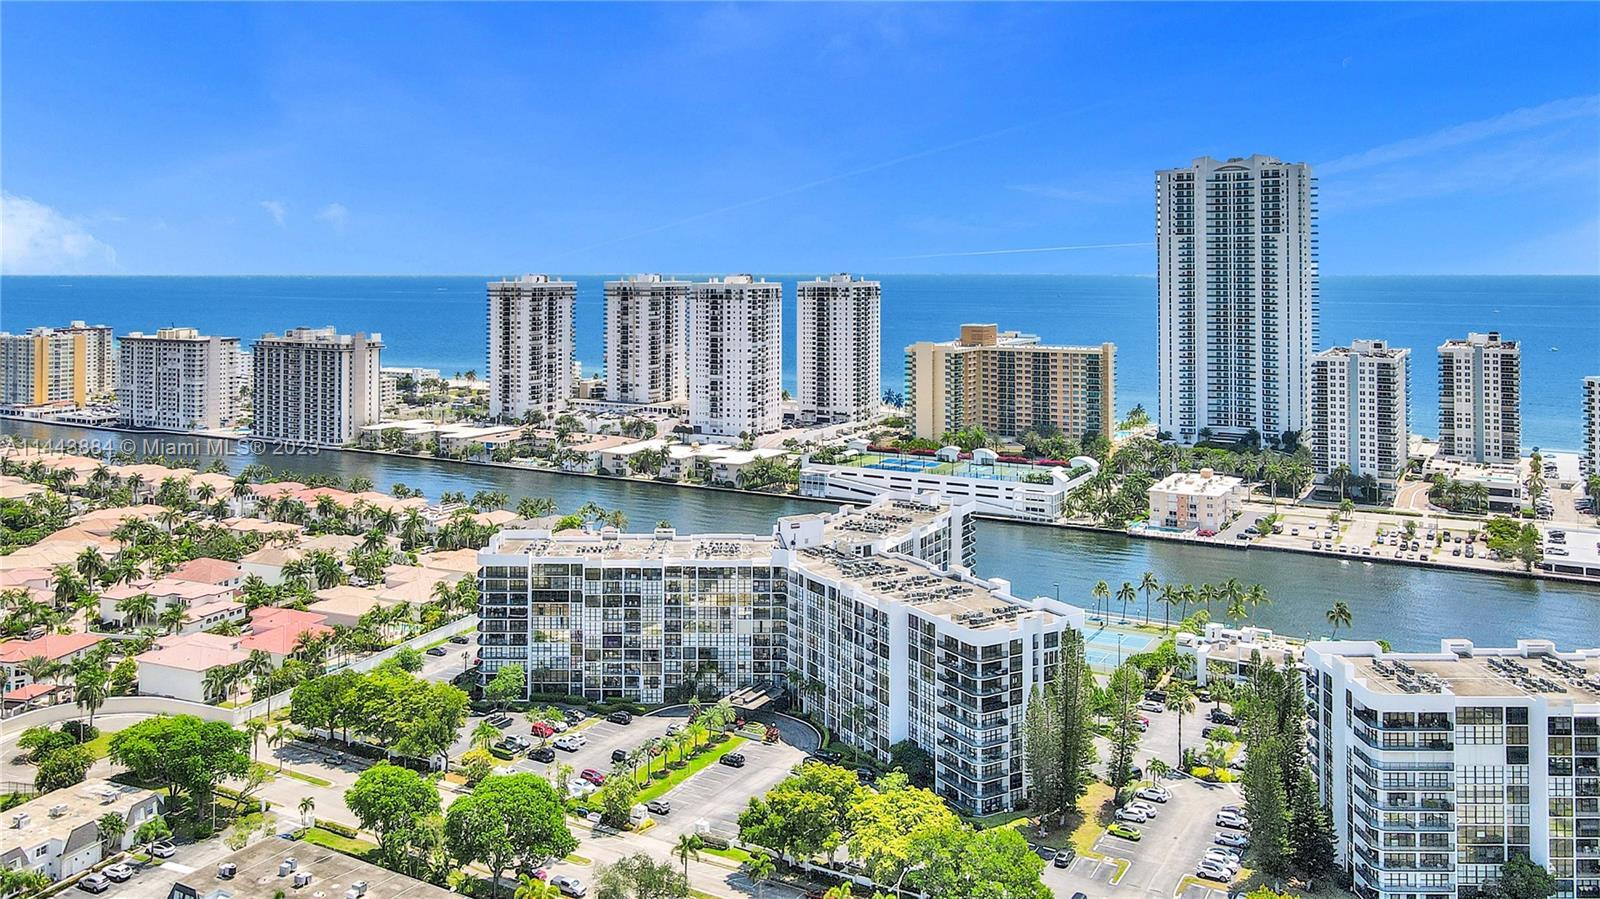 Gorgeous, light and bright – your ocean oasis awaits! This stunning 1 bed, 1.5 bath penthouse unit f